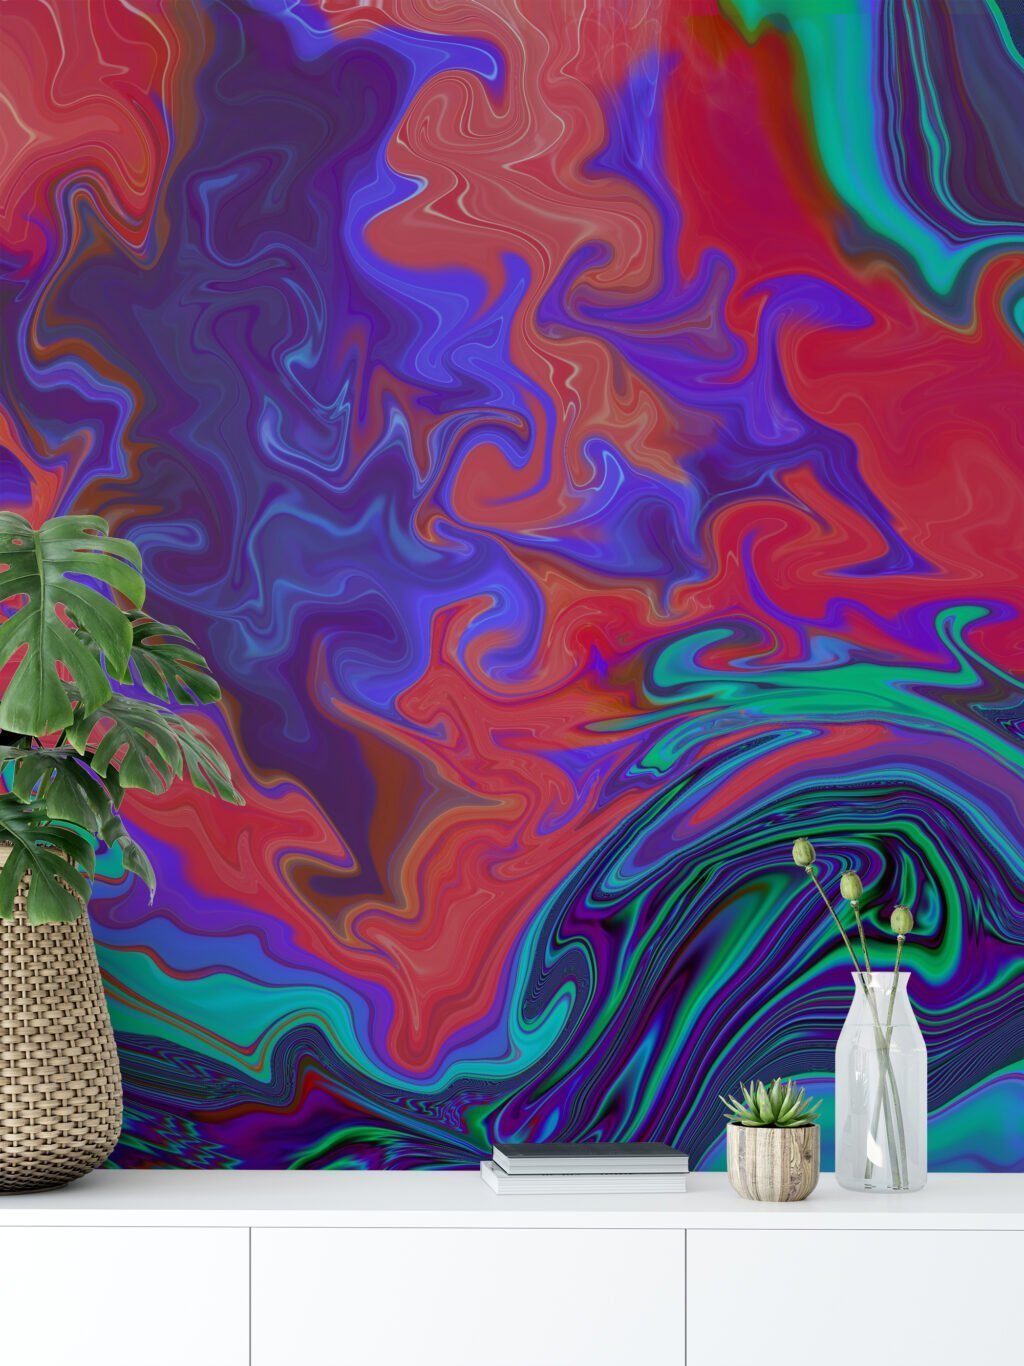 Psychedelic Abstract Colorful Ink Swirls Wallpaper, Vivid Liquid Abstract Peel & Stick Wall Mural